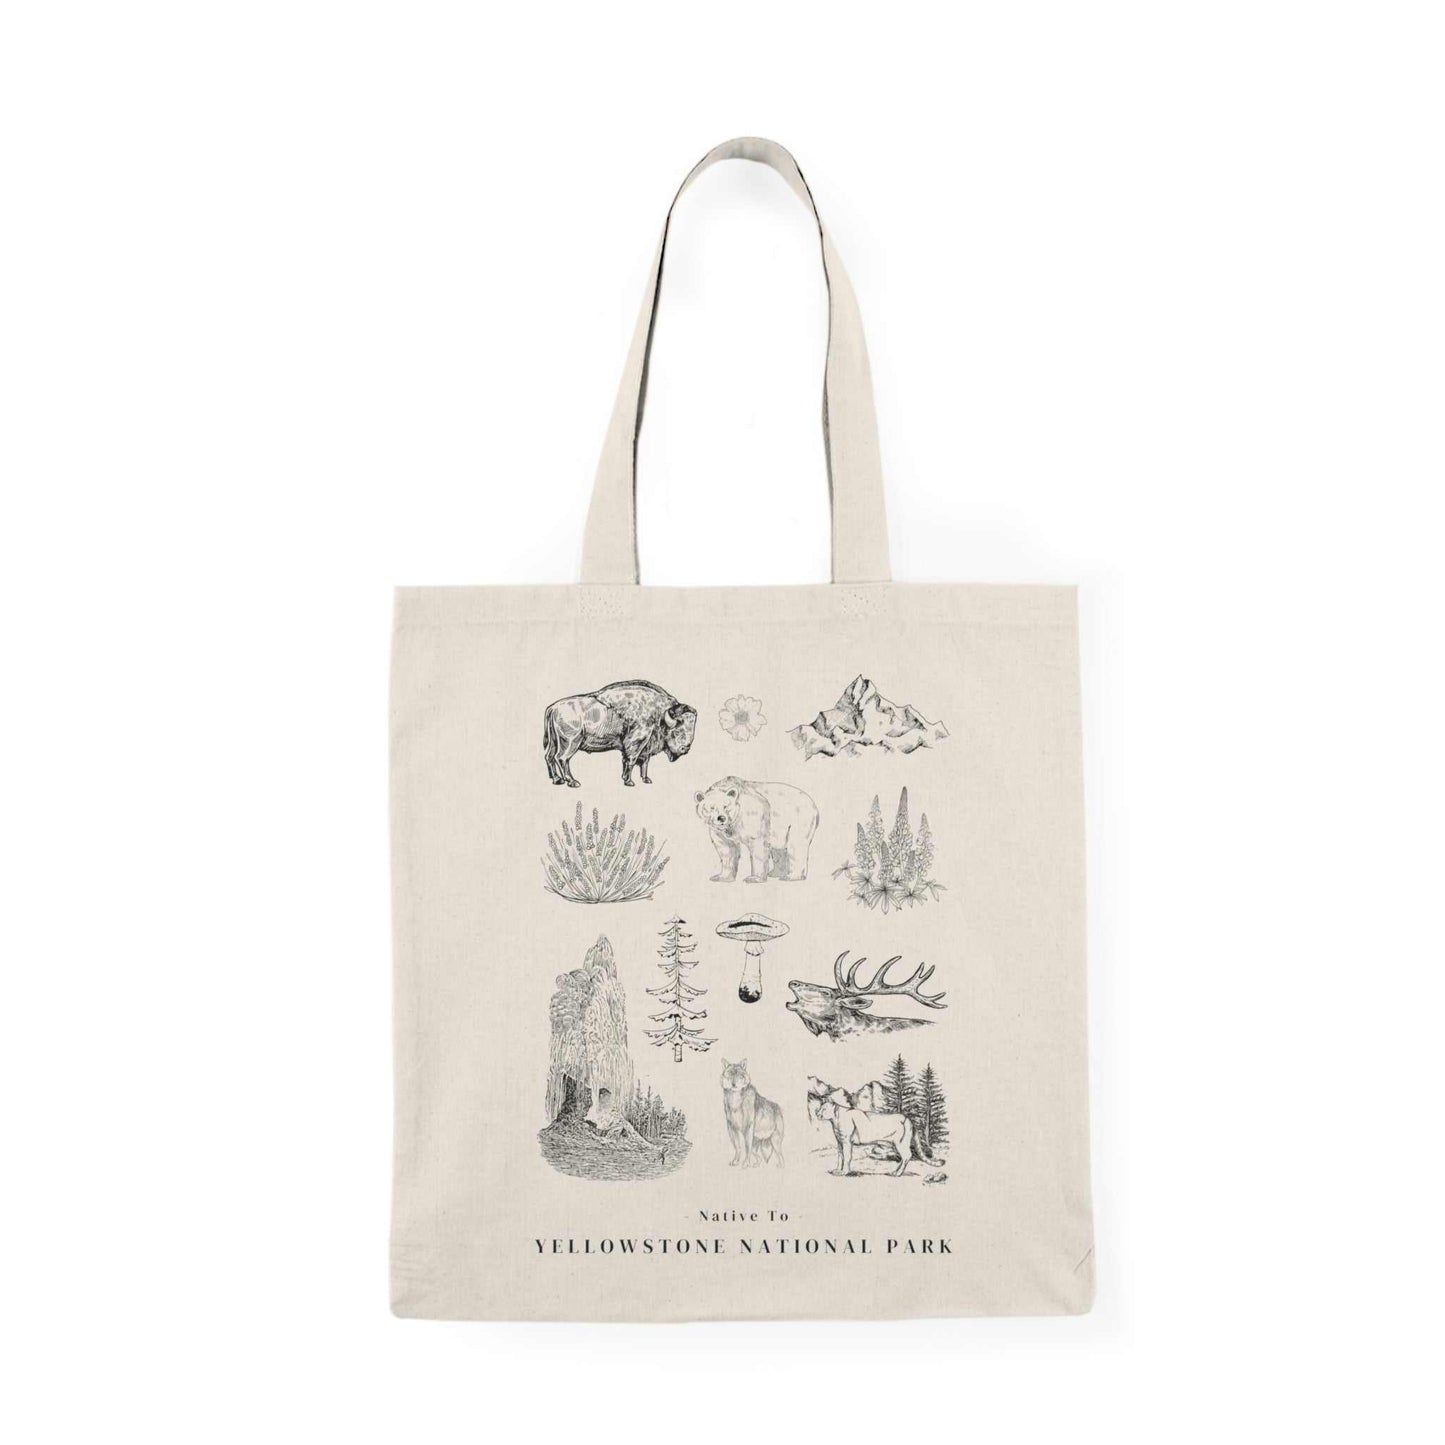 Yellowstone National Park ToteThese organic cotton tote bags feature the iconic flora and fauna of Yellowstone National Parkin the state of Wyoming.
Details:
- 15.75"h x 15.25"w - handle length o